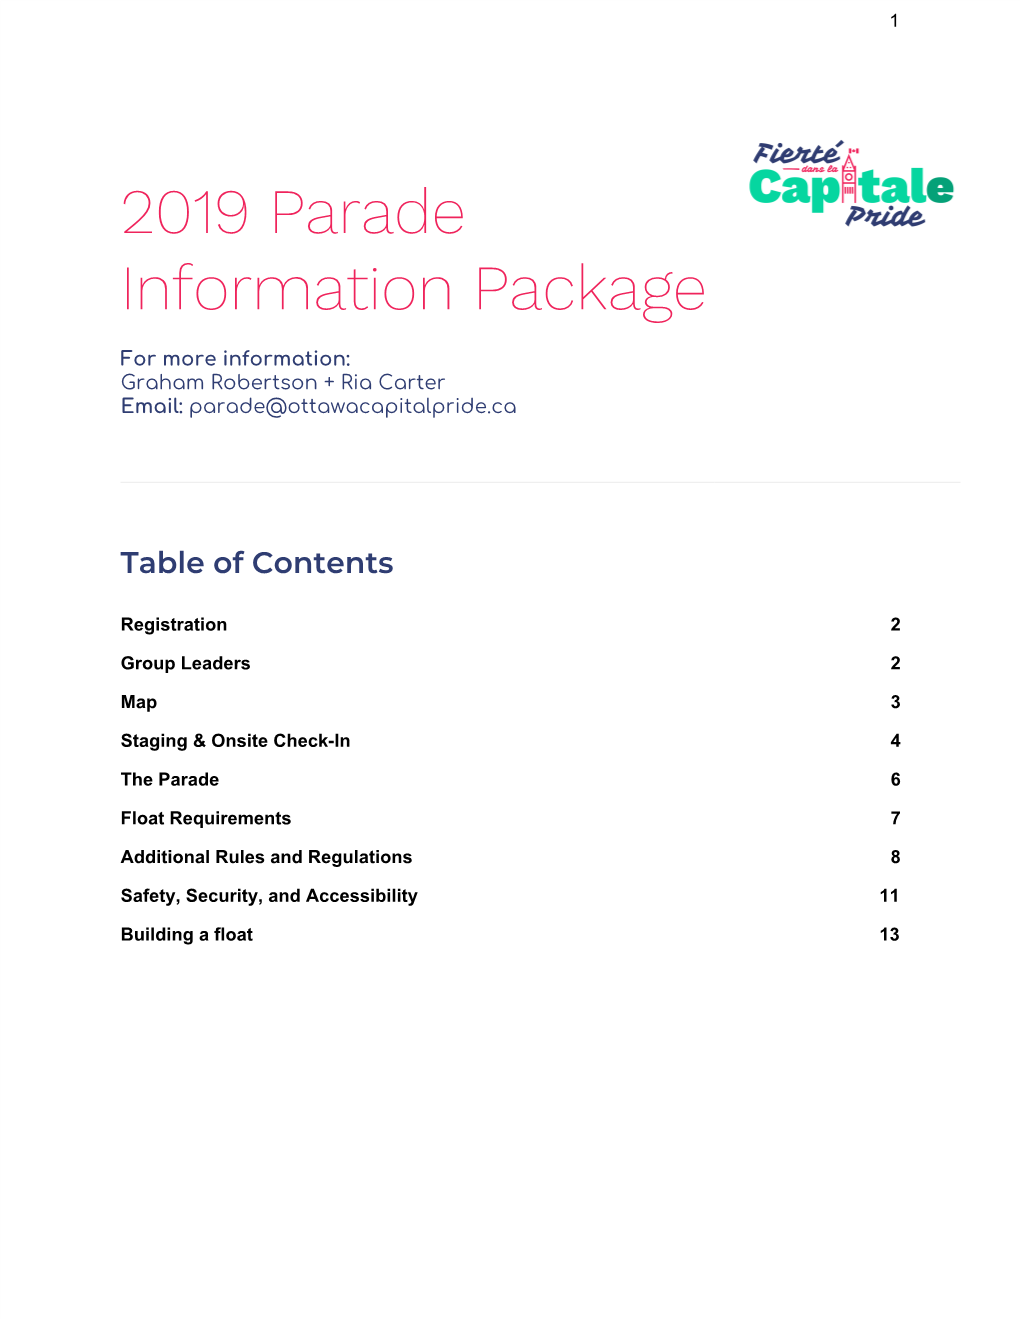 2019 Parade Information Package